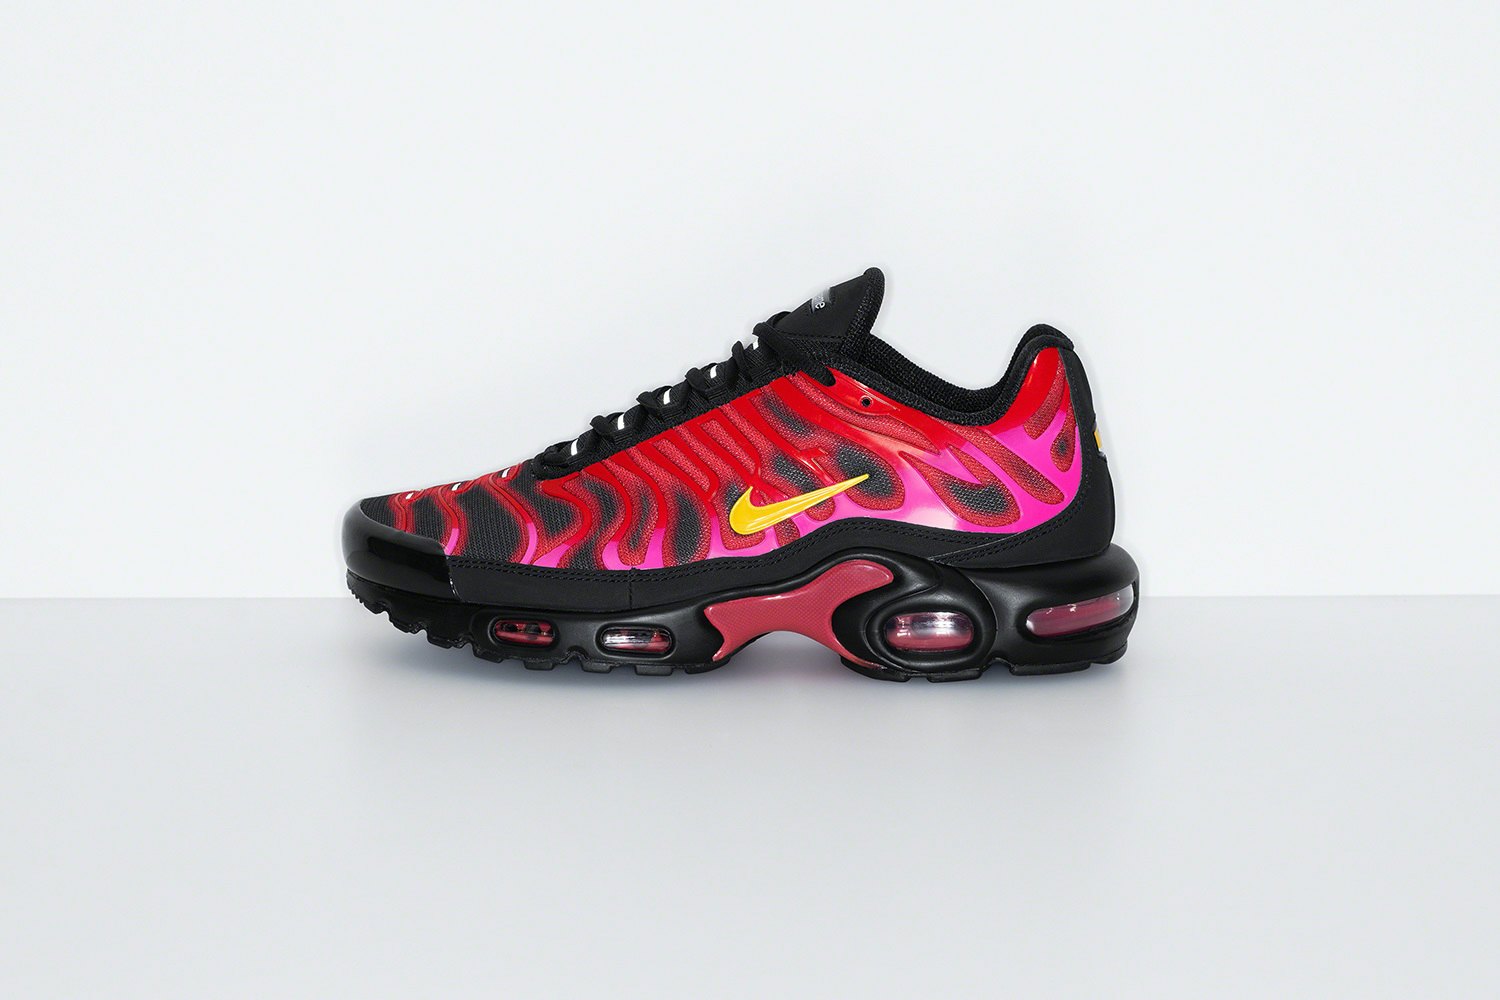 Supreme's Air Max Plus sneakers are its 